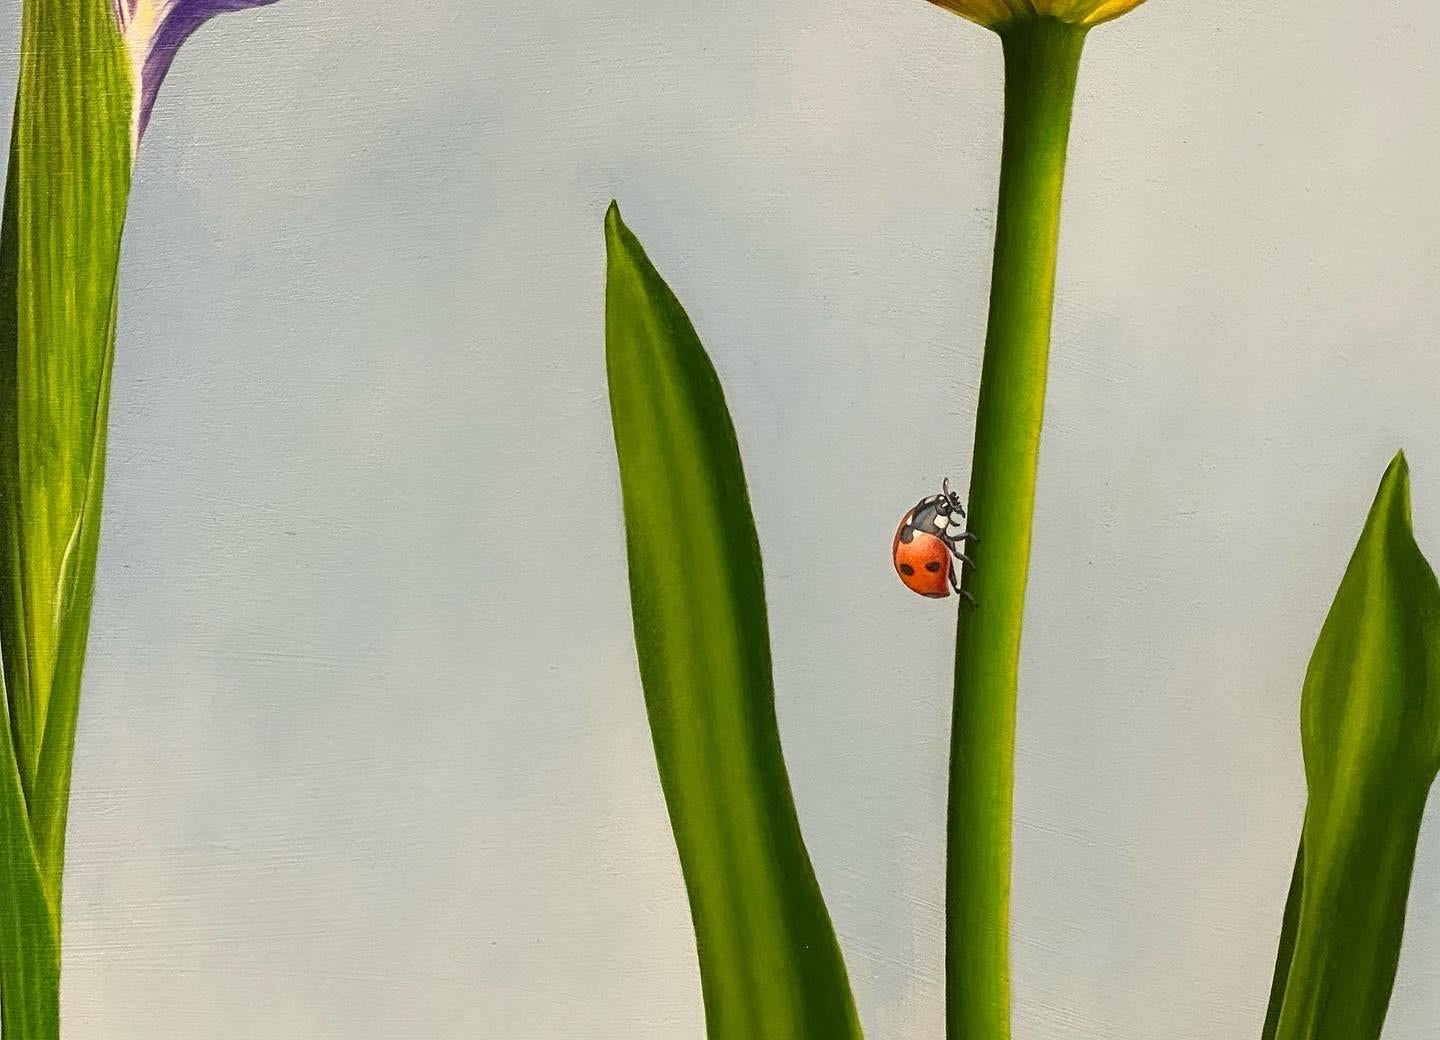 JP Marsman
Bird, ladybird & flowers
Oilpainting on wood panel
100 x 140 cm ( the painting is framed in a wooden black frame (see pictures)
With the frame the size is 110 x 150 cm (frame is included in price)

JP Marsman's cheerful and